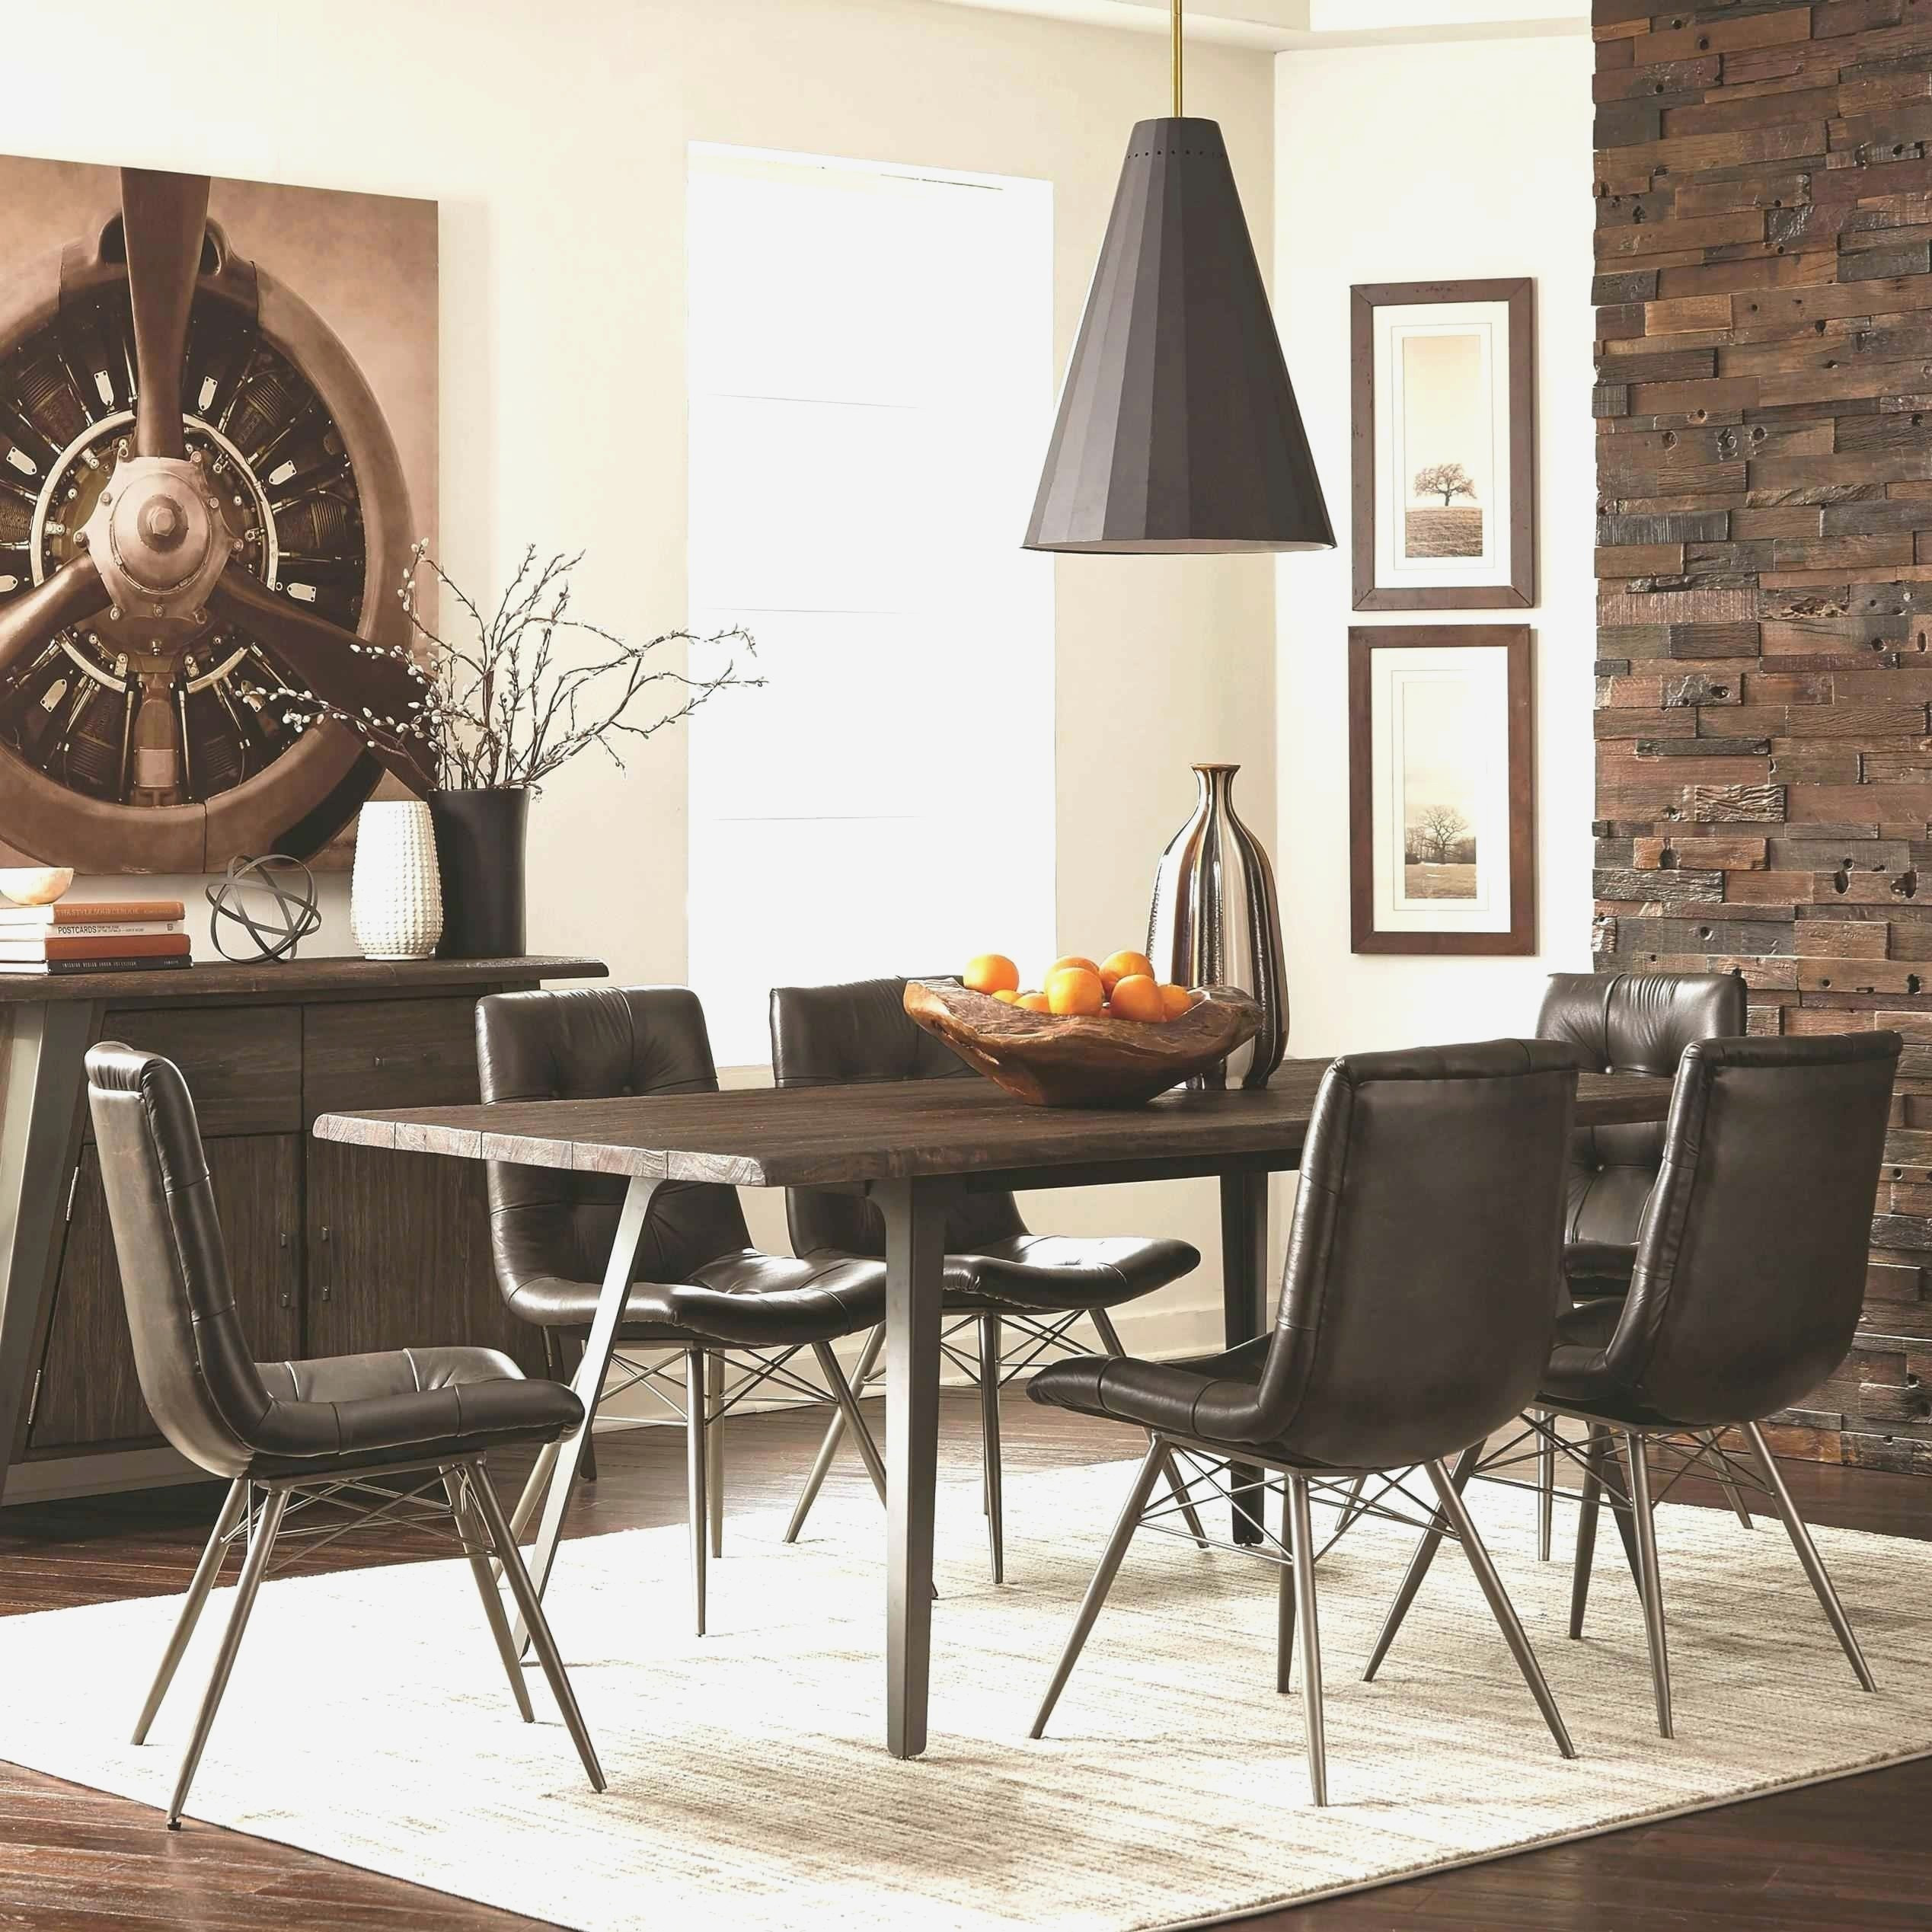 11 Best Best Hardwood Floors for Small Spaces 2023 free download best hardwood floors for small spaces of best of dining table for small room my gallery with 50 elegant collection tar dining room table light and ashley furniture chandeliers unique badcook